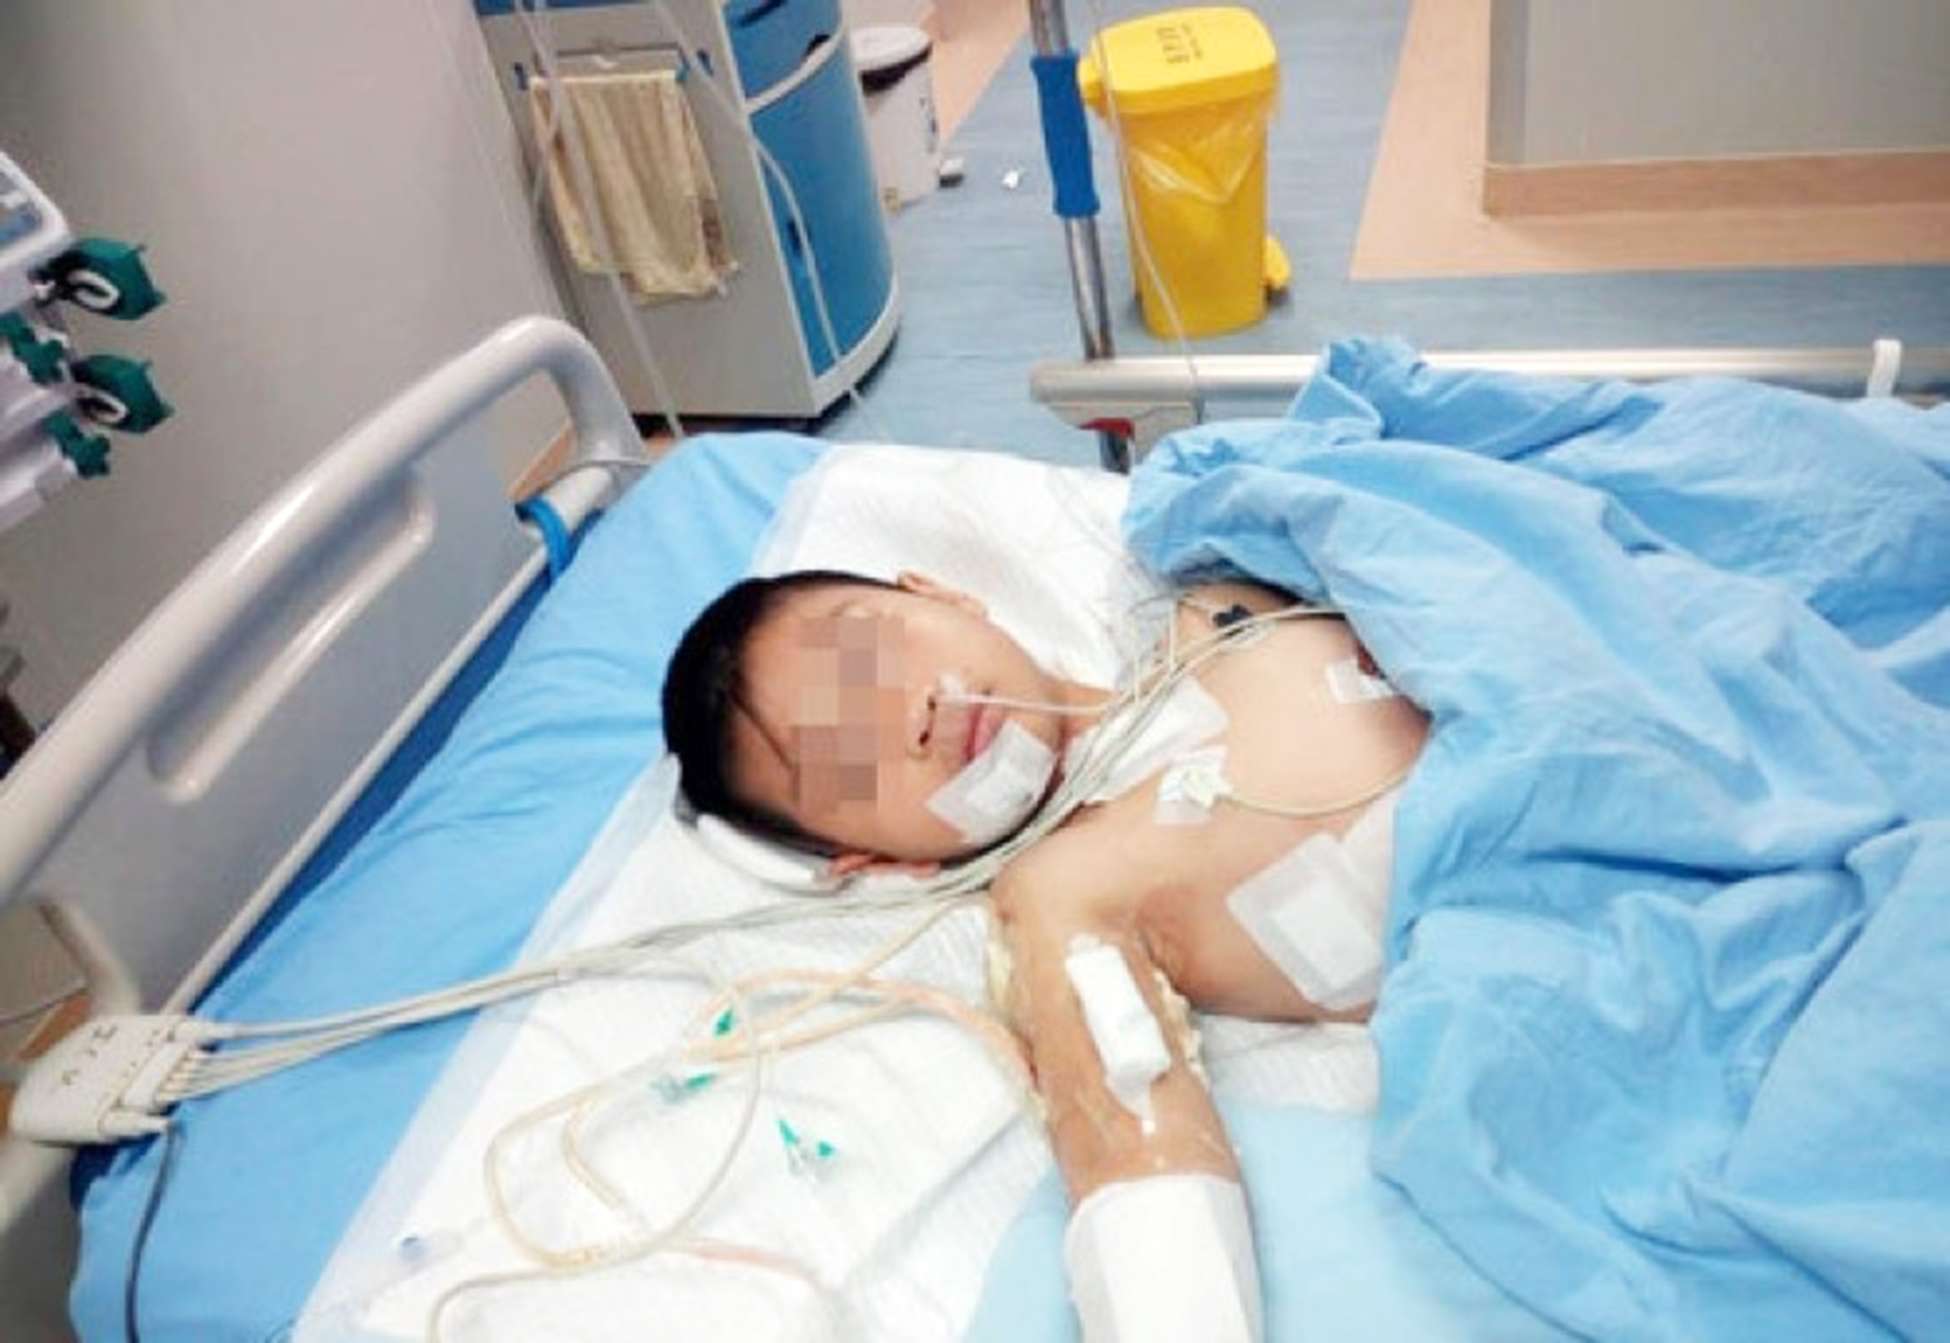 The boy is now recovering from his wounds in hospital. Photo: SCMP Pictures